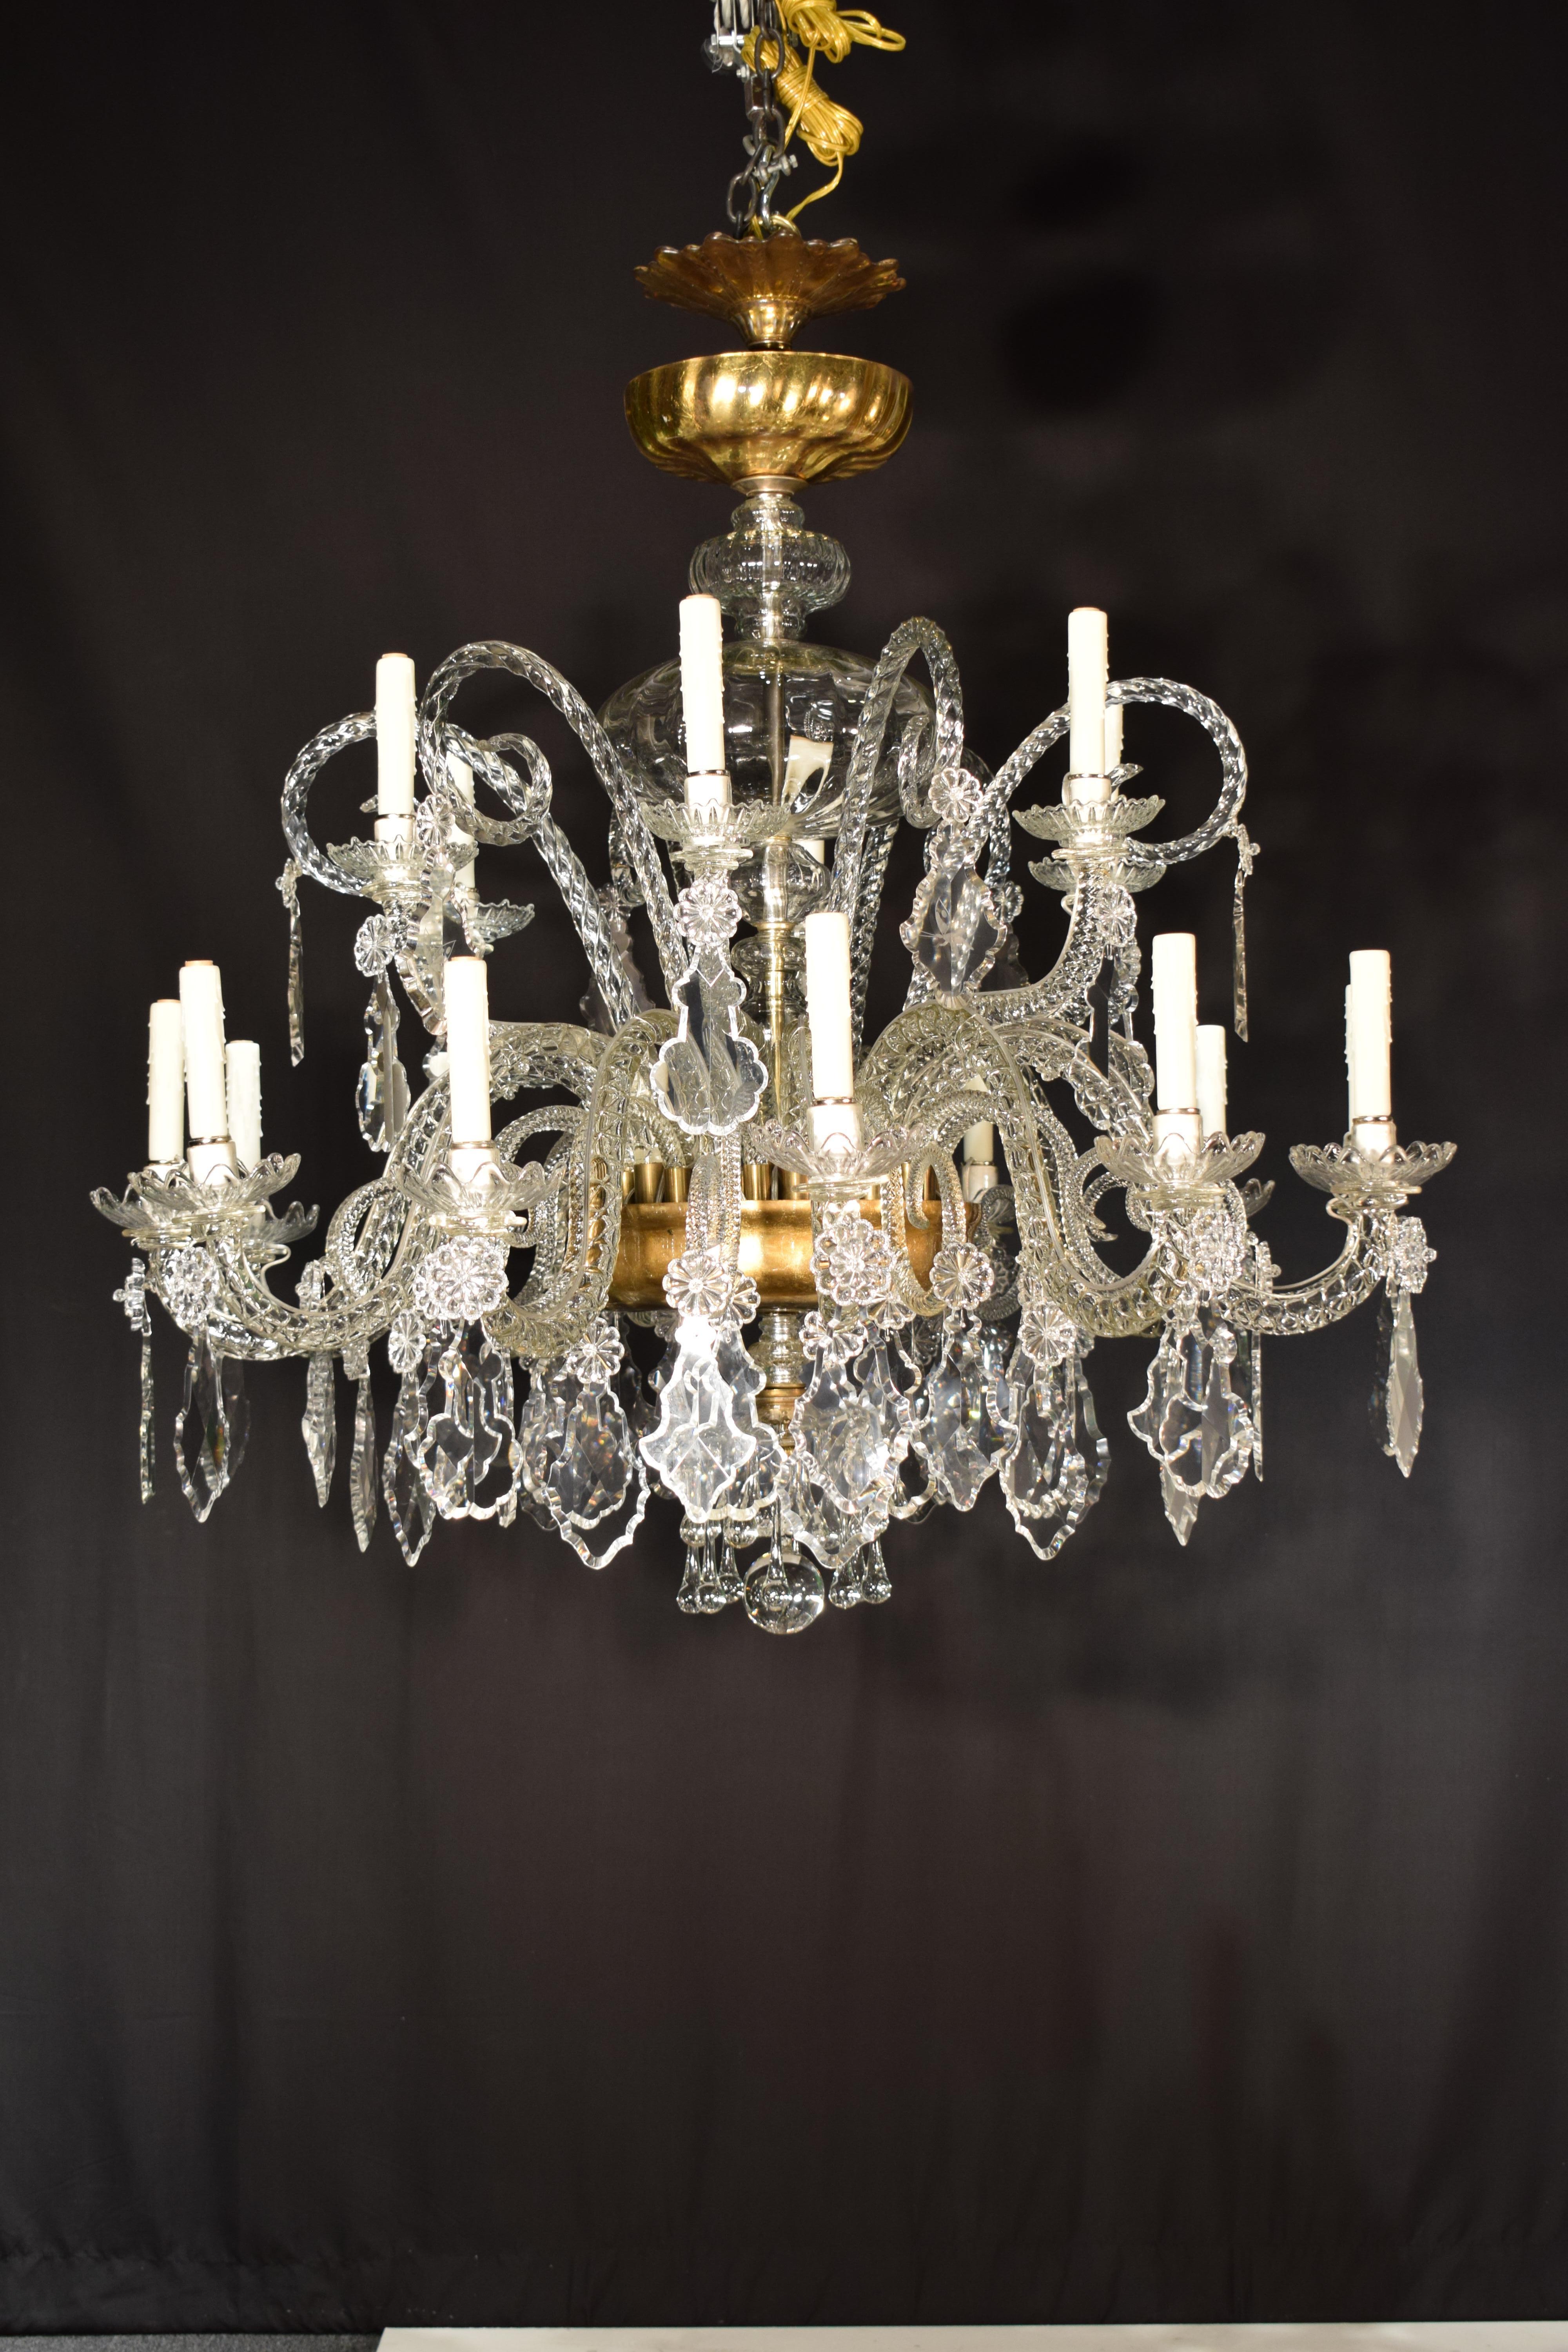 A superb Venetian glass chandelier. All original, circa 1860. 16 lights in two tiers. A truly exceptional fixture.
Dimensions: Height 47